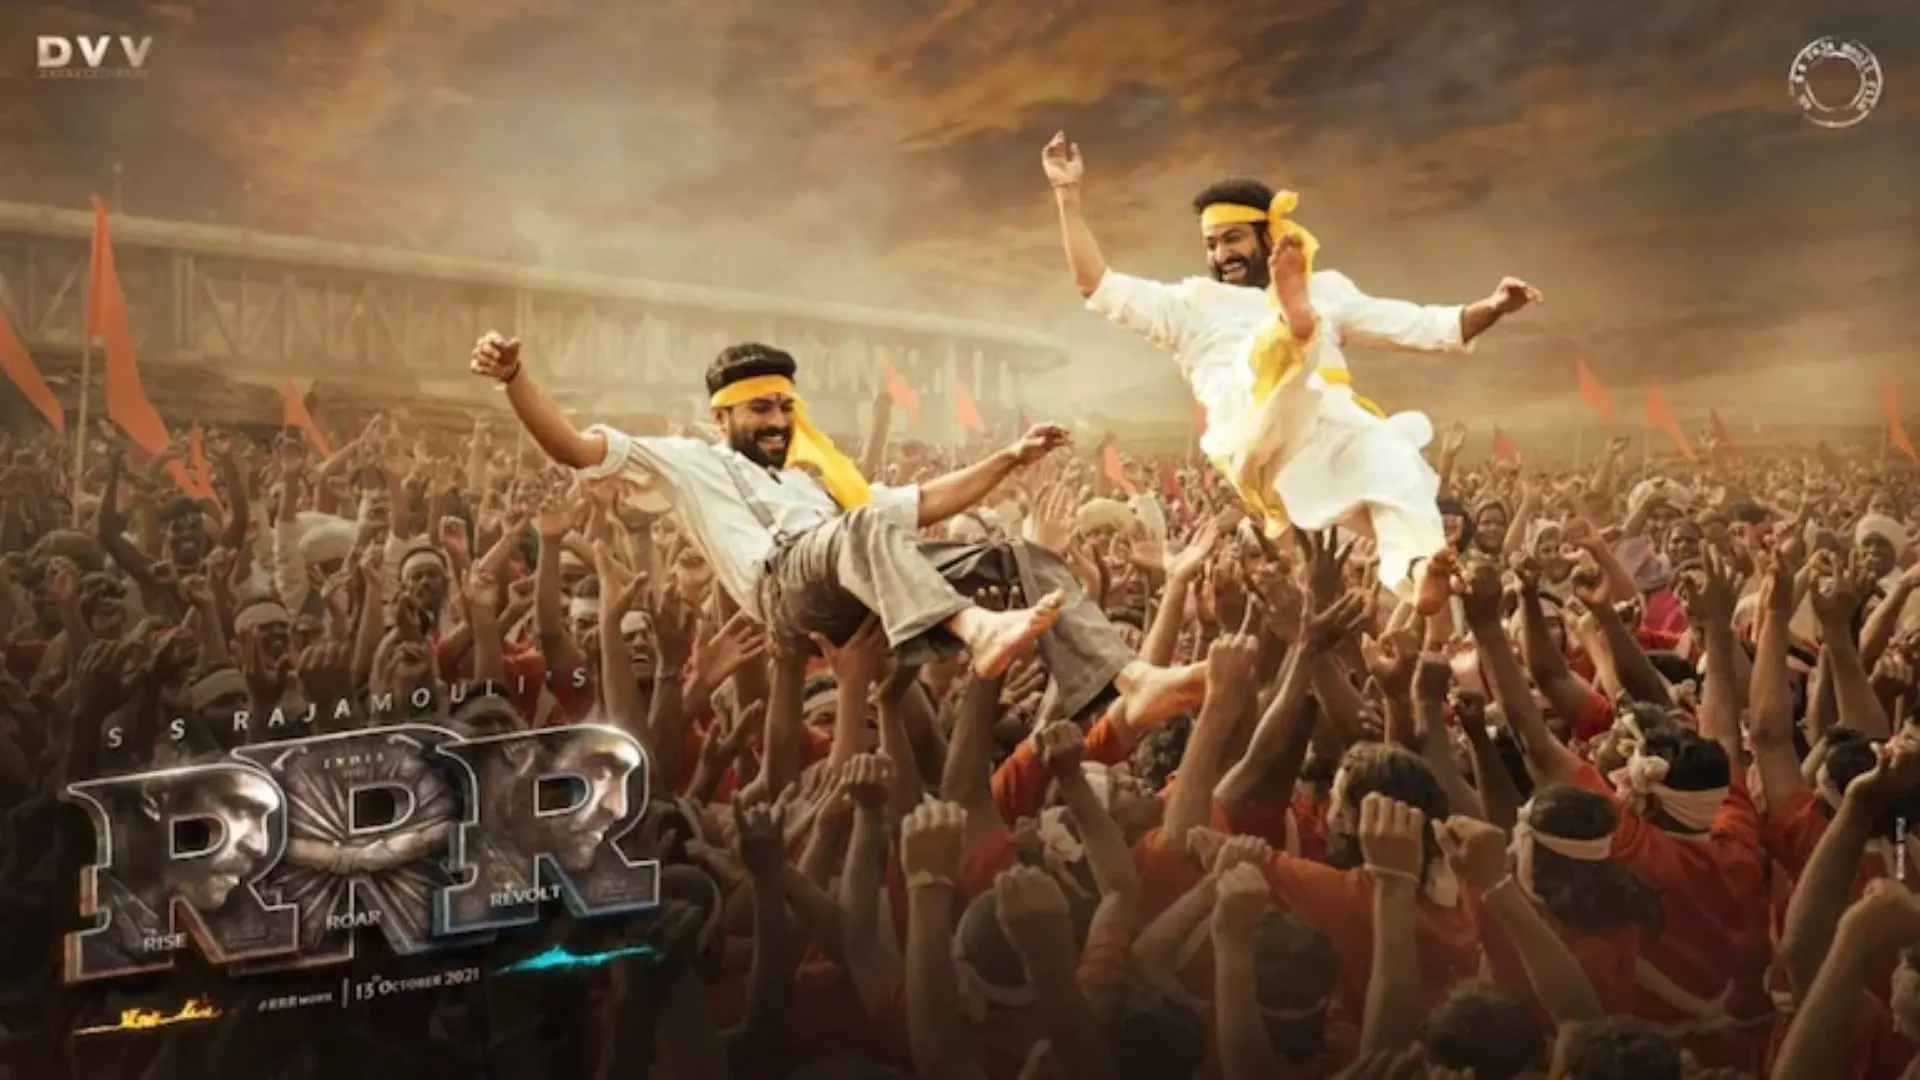 RRR Movie Likely to be Released on Republic Day 26th January 2022